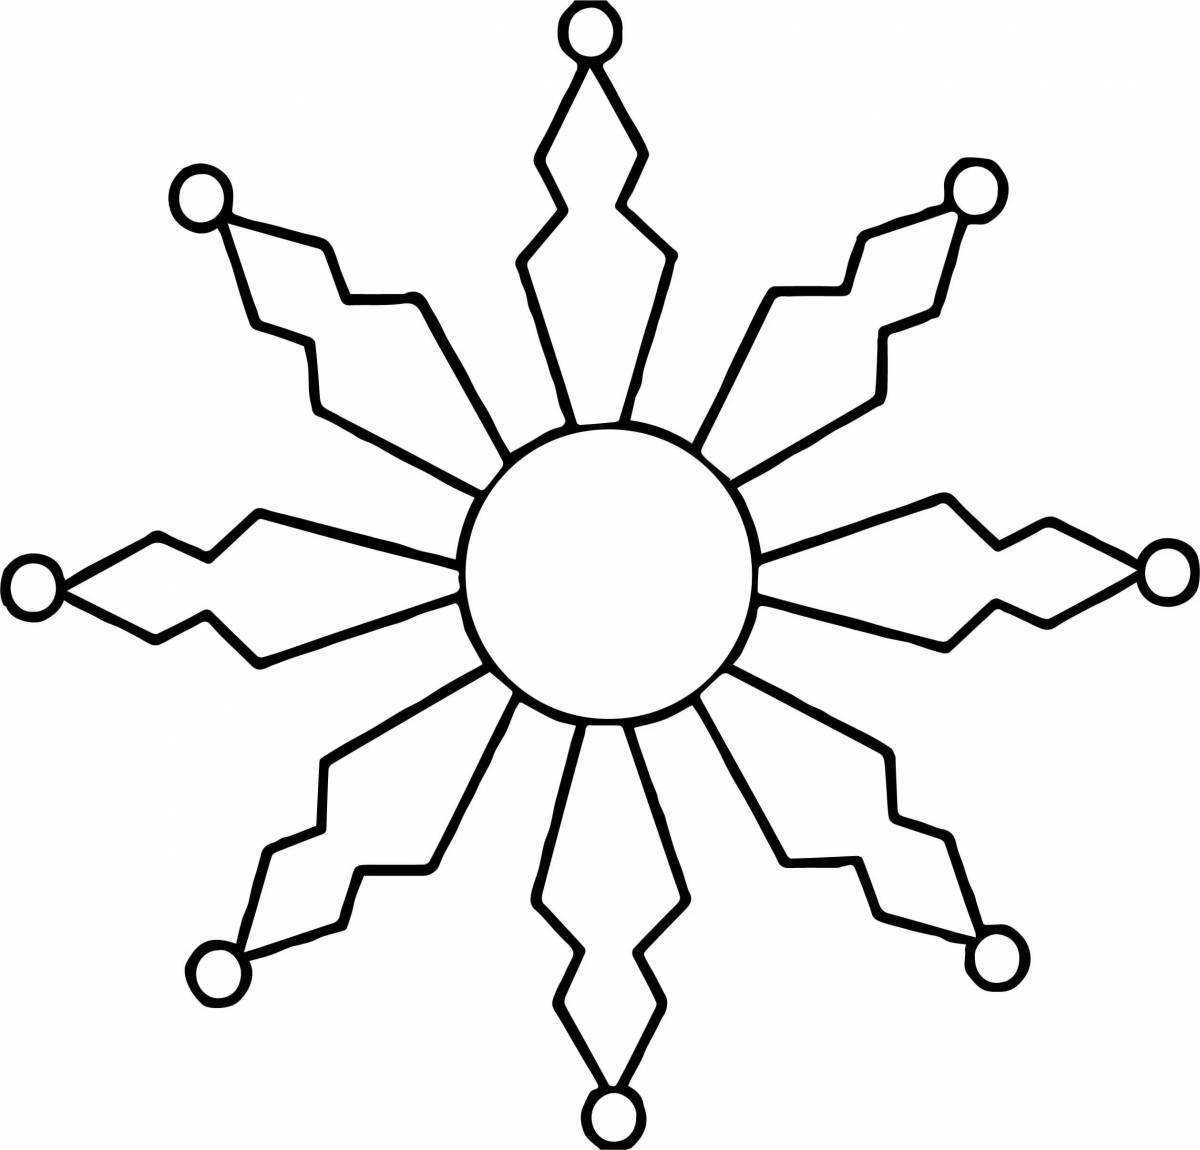 Glitter snowflake coloring book for 2-3 year olds